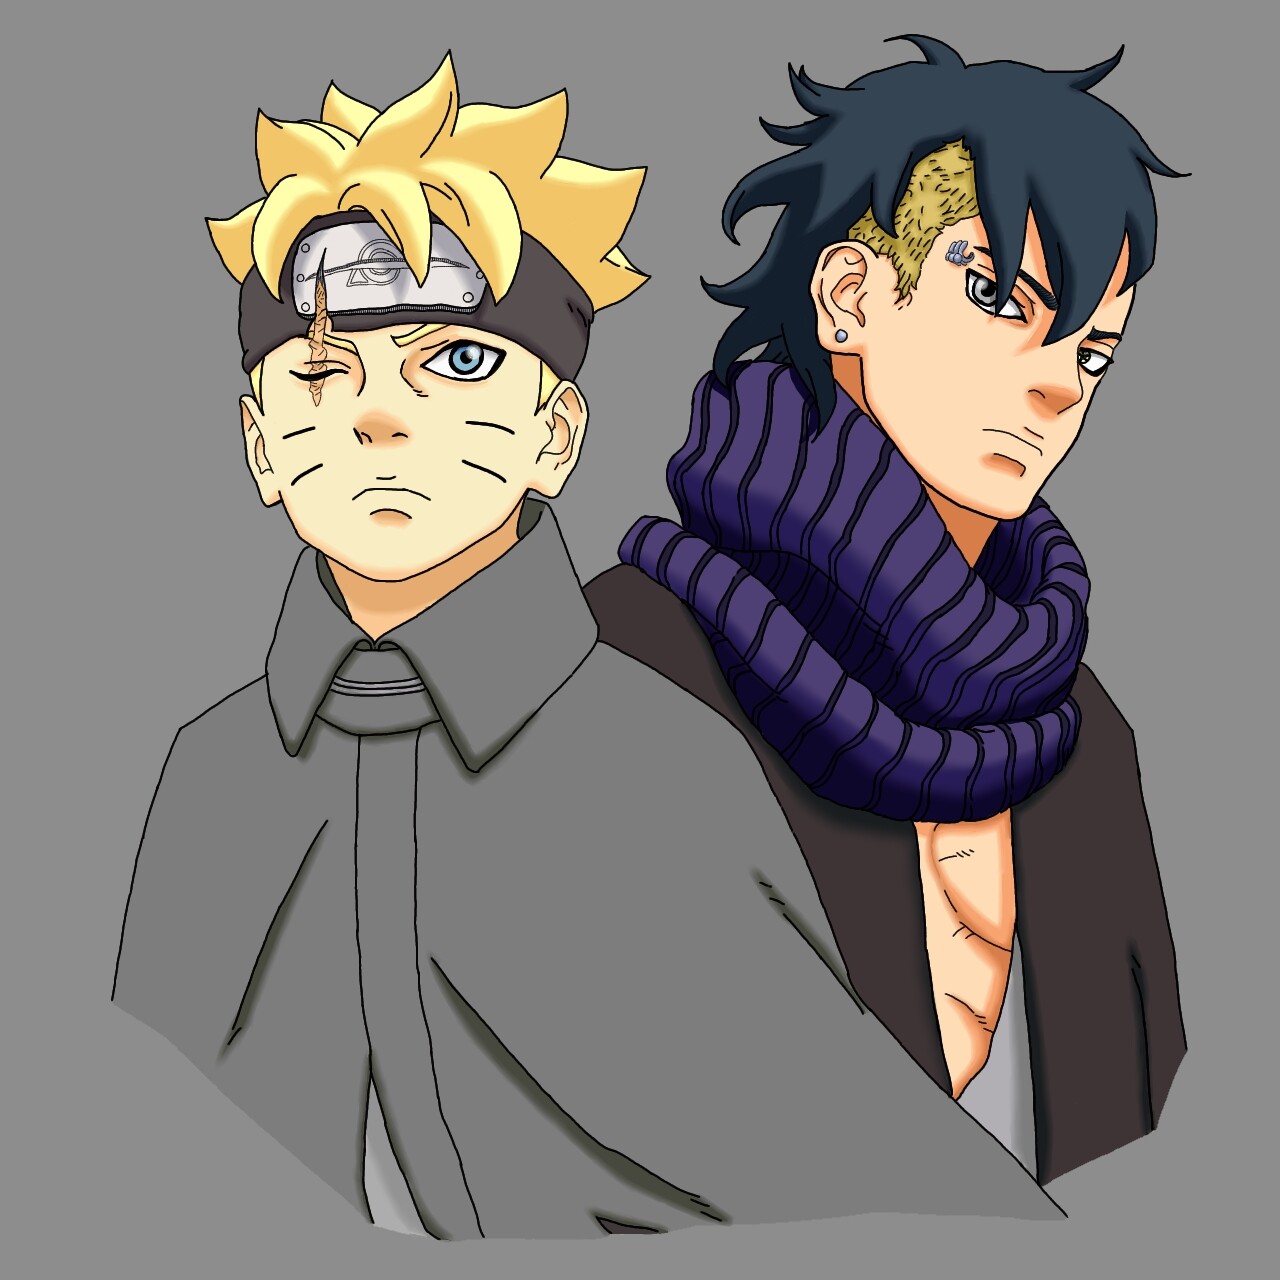 As we get closer to timeskip, here's Boruto over the years by me